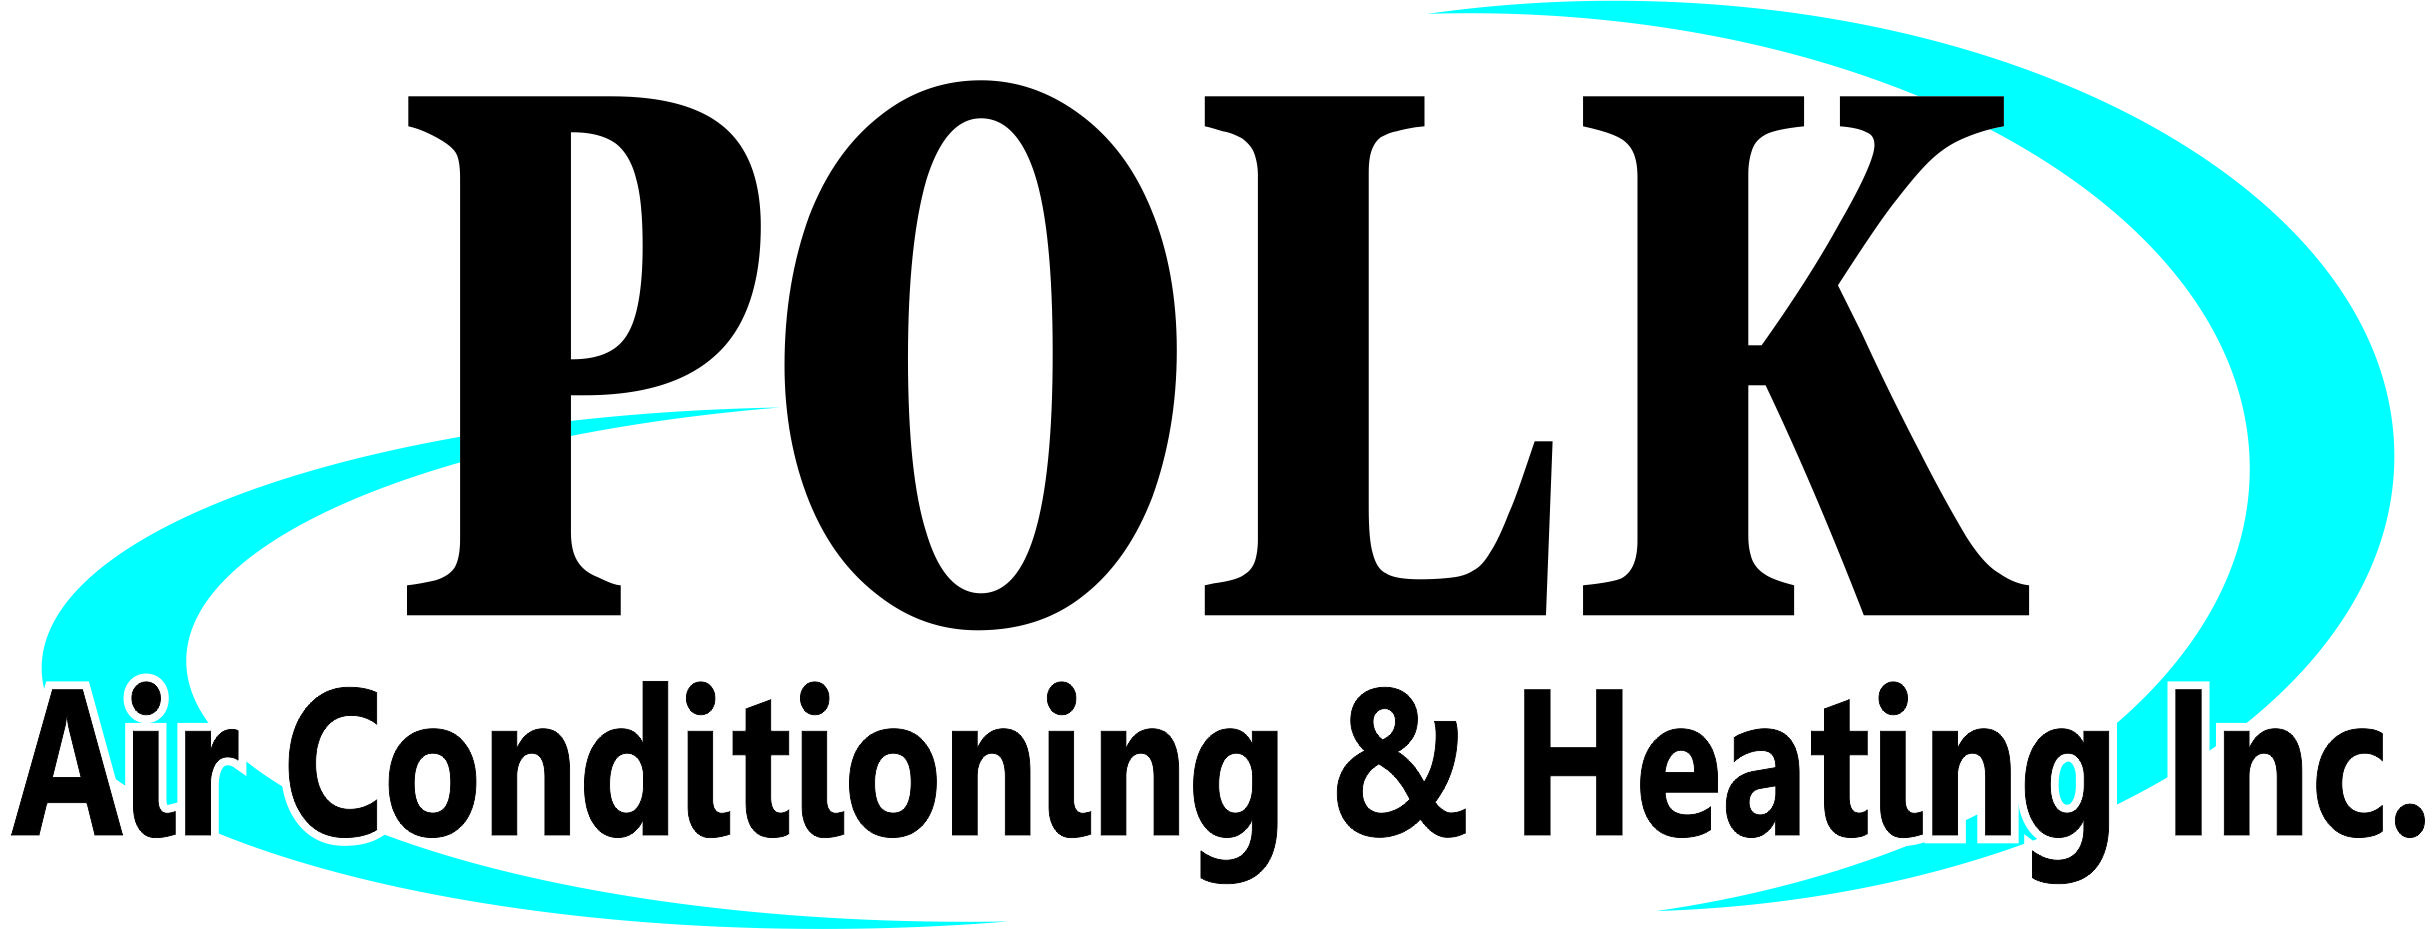 Polk Air Conditioning & Heating - Air Conditioning and Heating Contractor